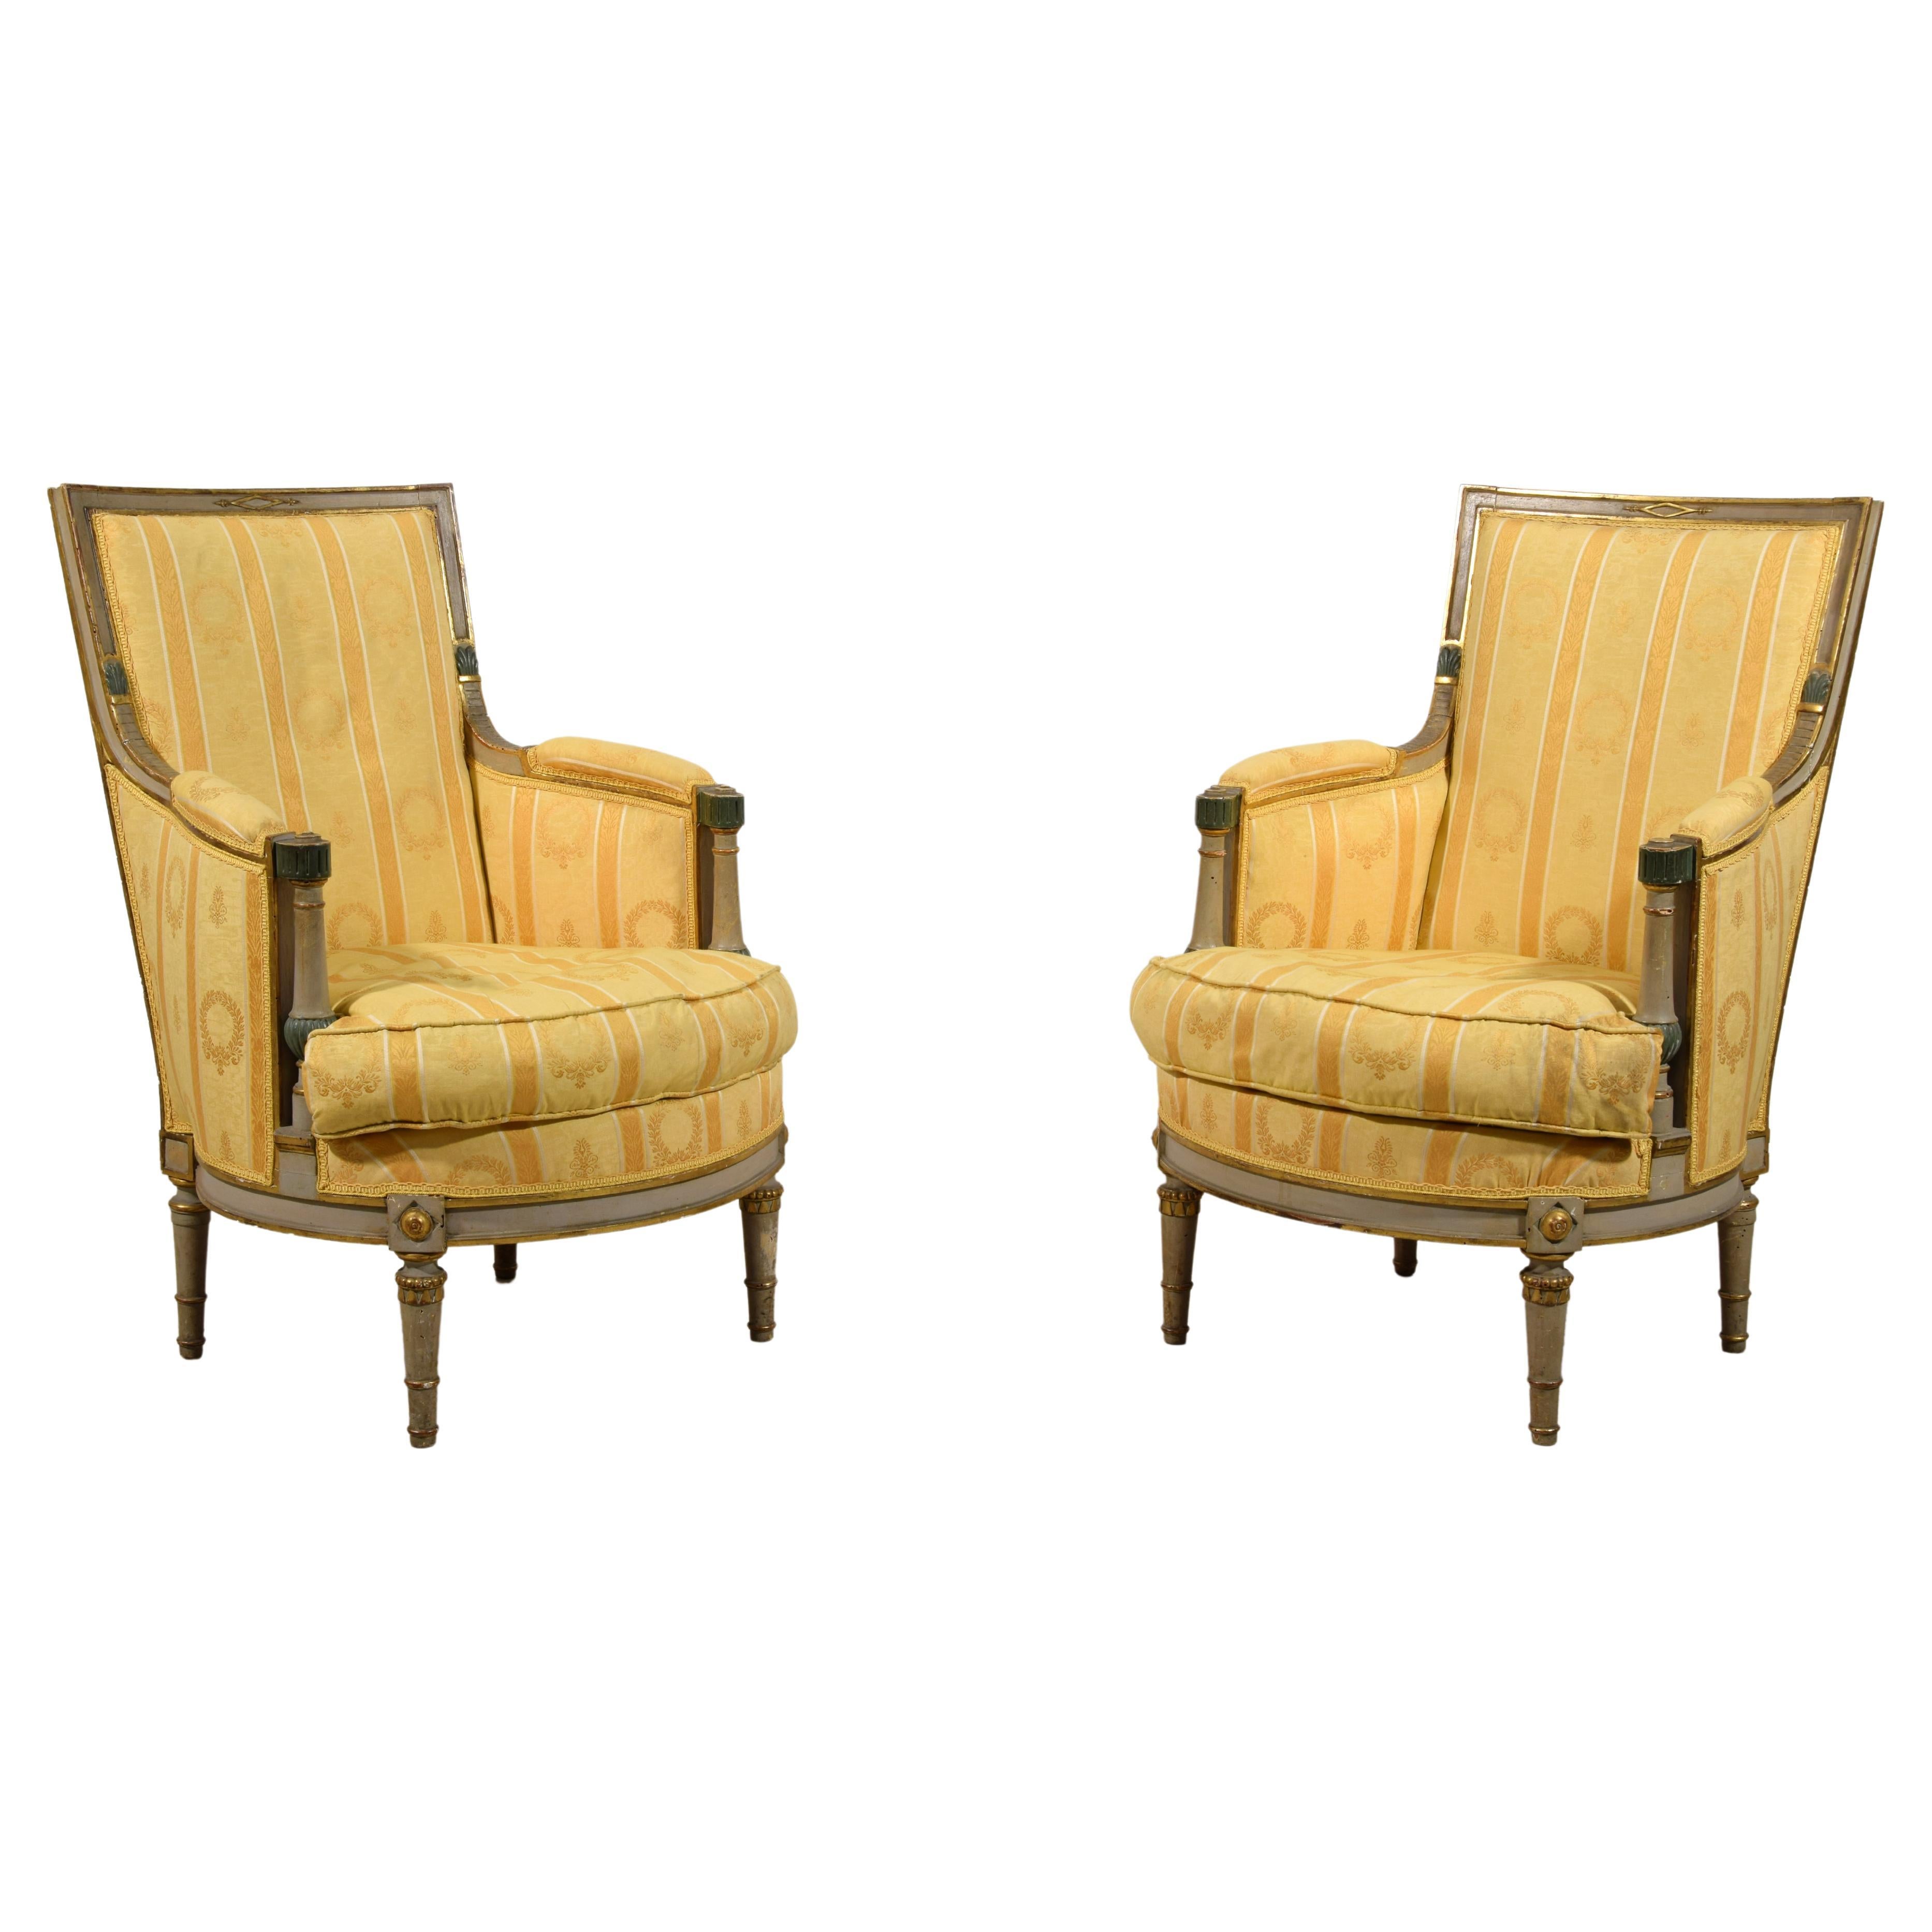 19th Century, Pair of French Lacquered and Giltwood Armchairs